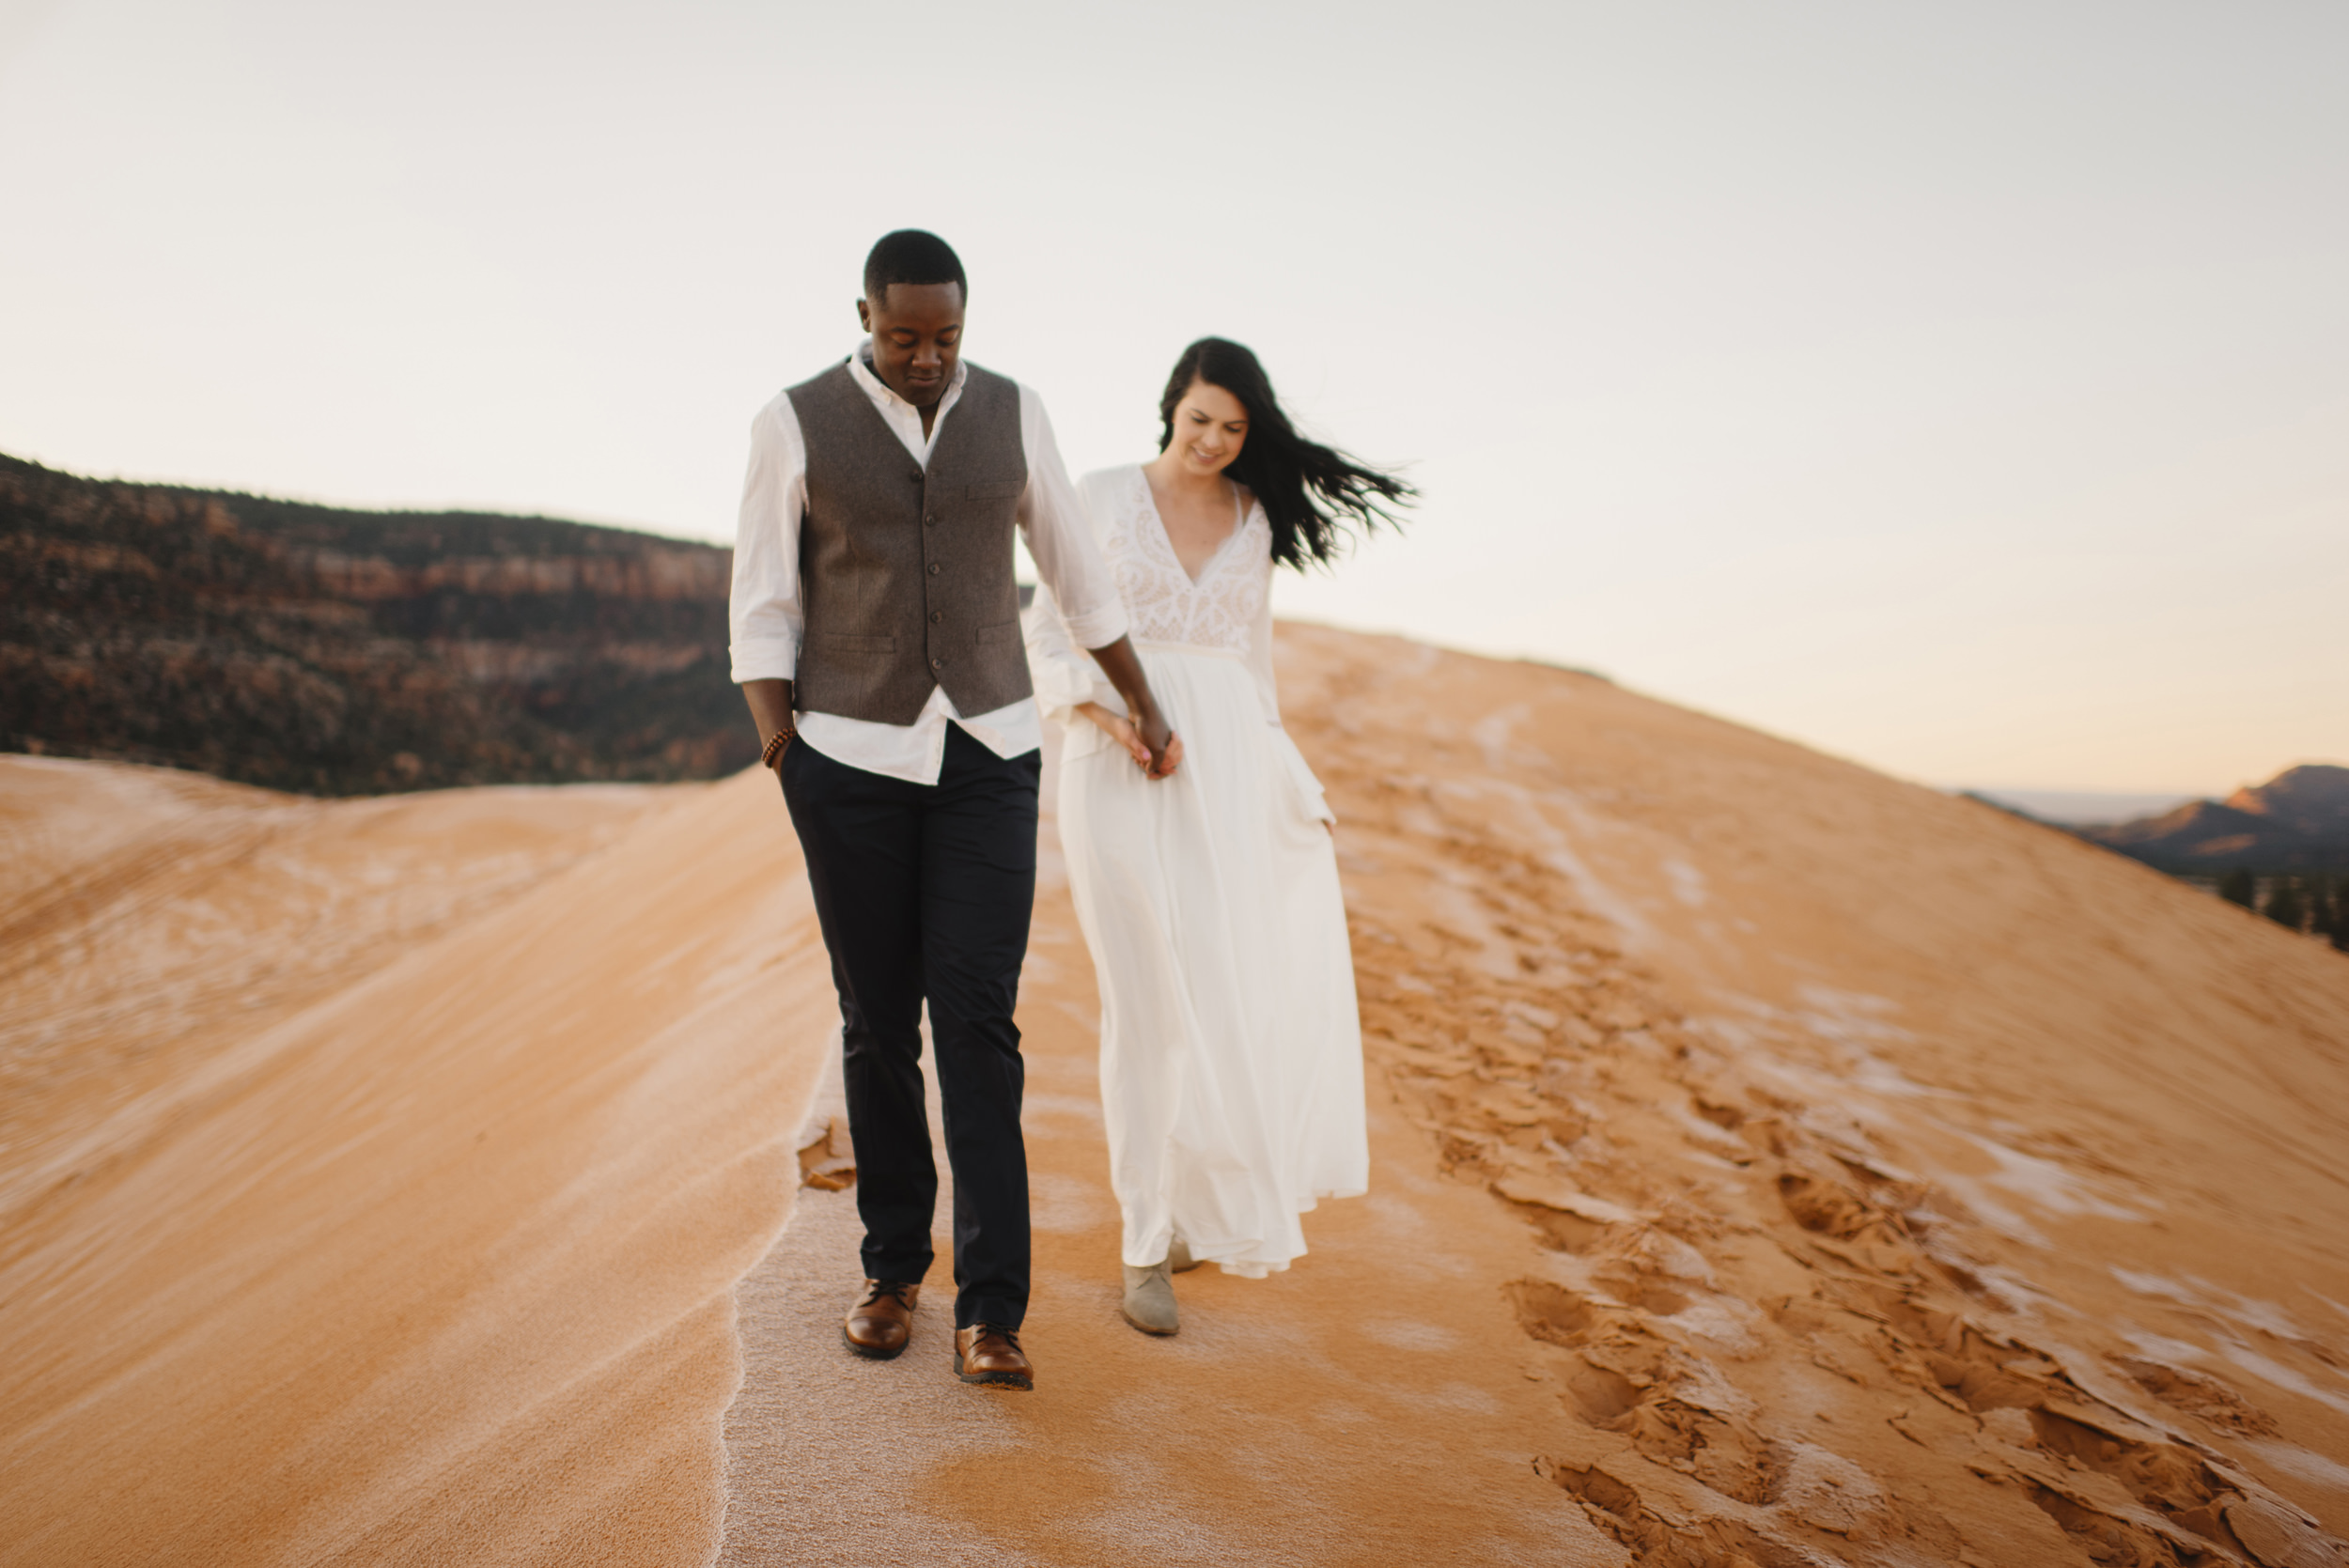 Holding hands a couple smiles during their Coral Pink Sand Dunes Engagement Photography Session by Utah Destination Elopement Photographer Colby and Jess